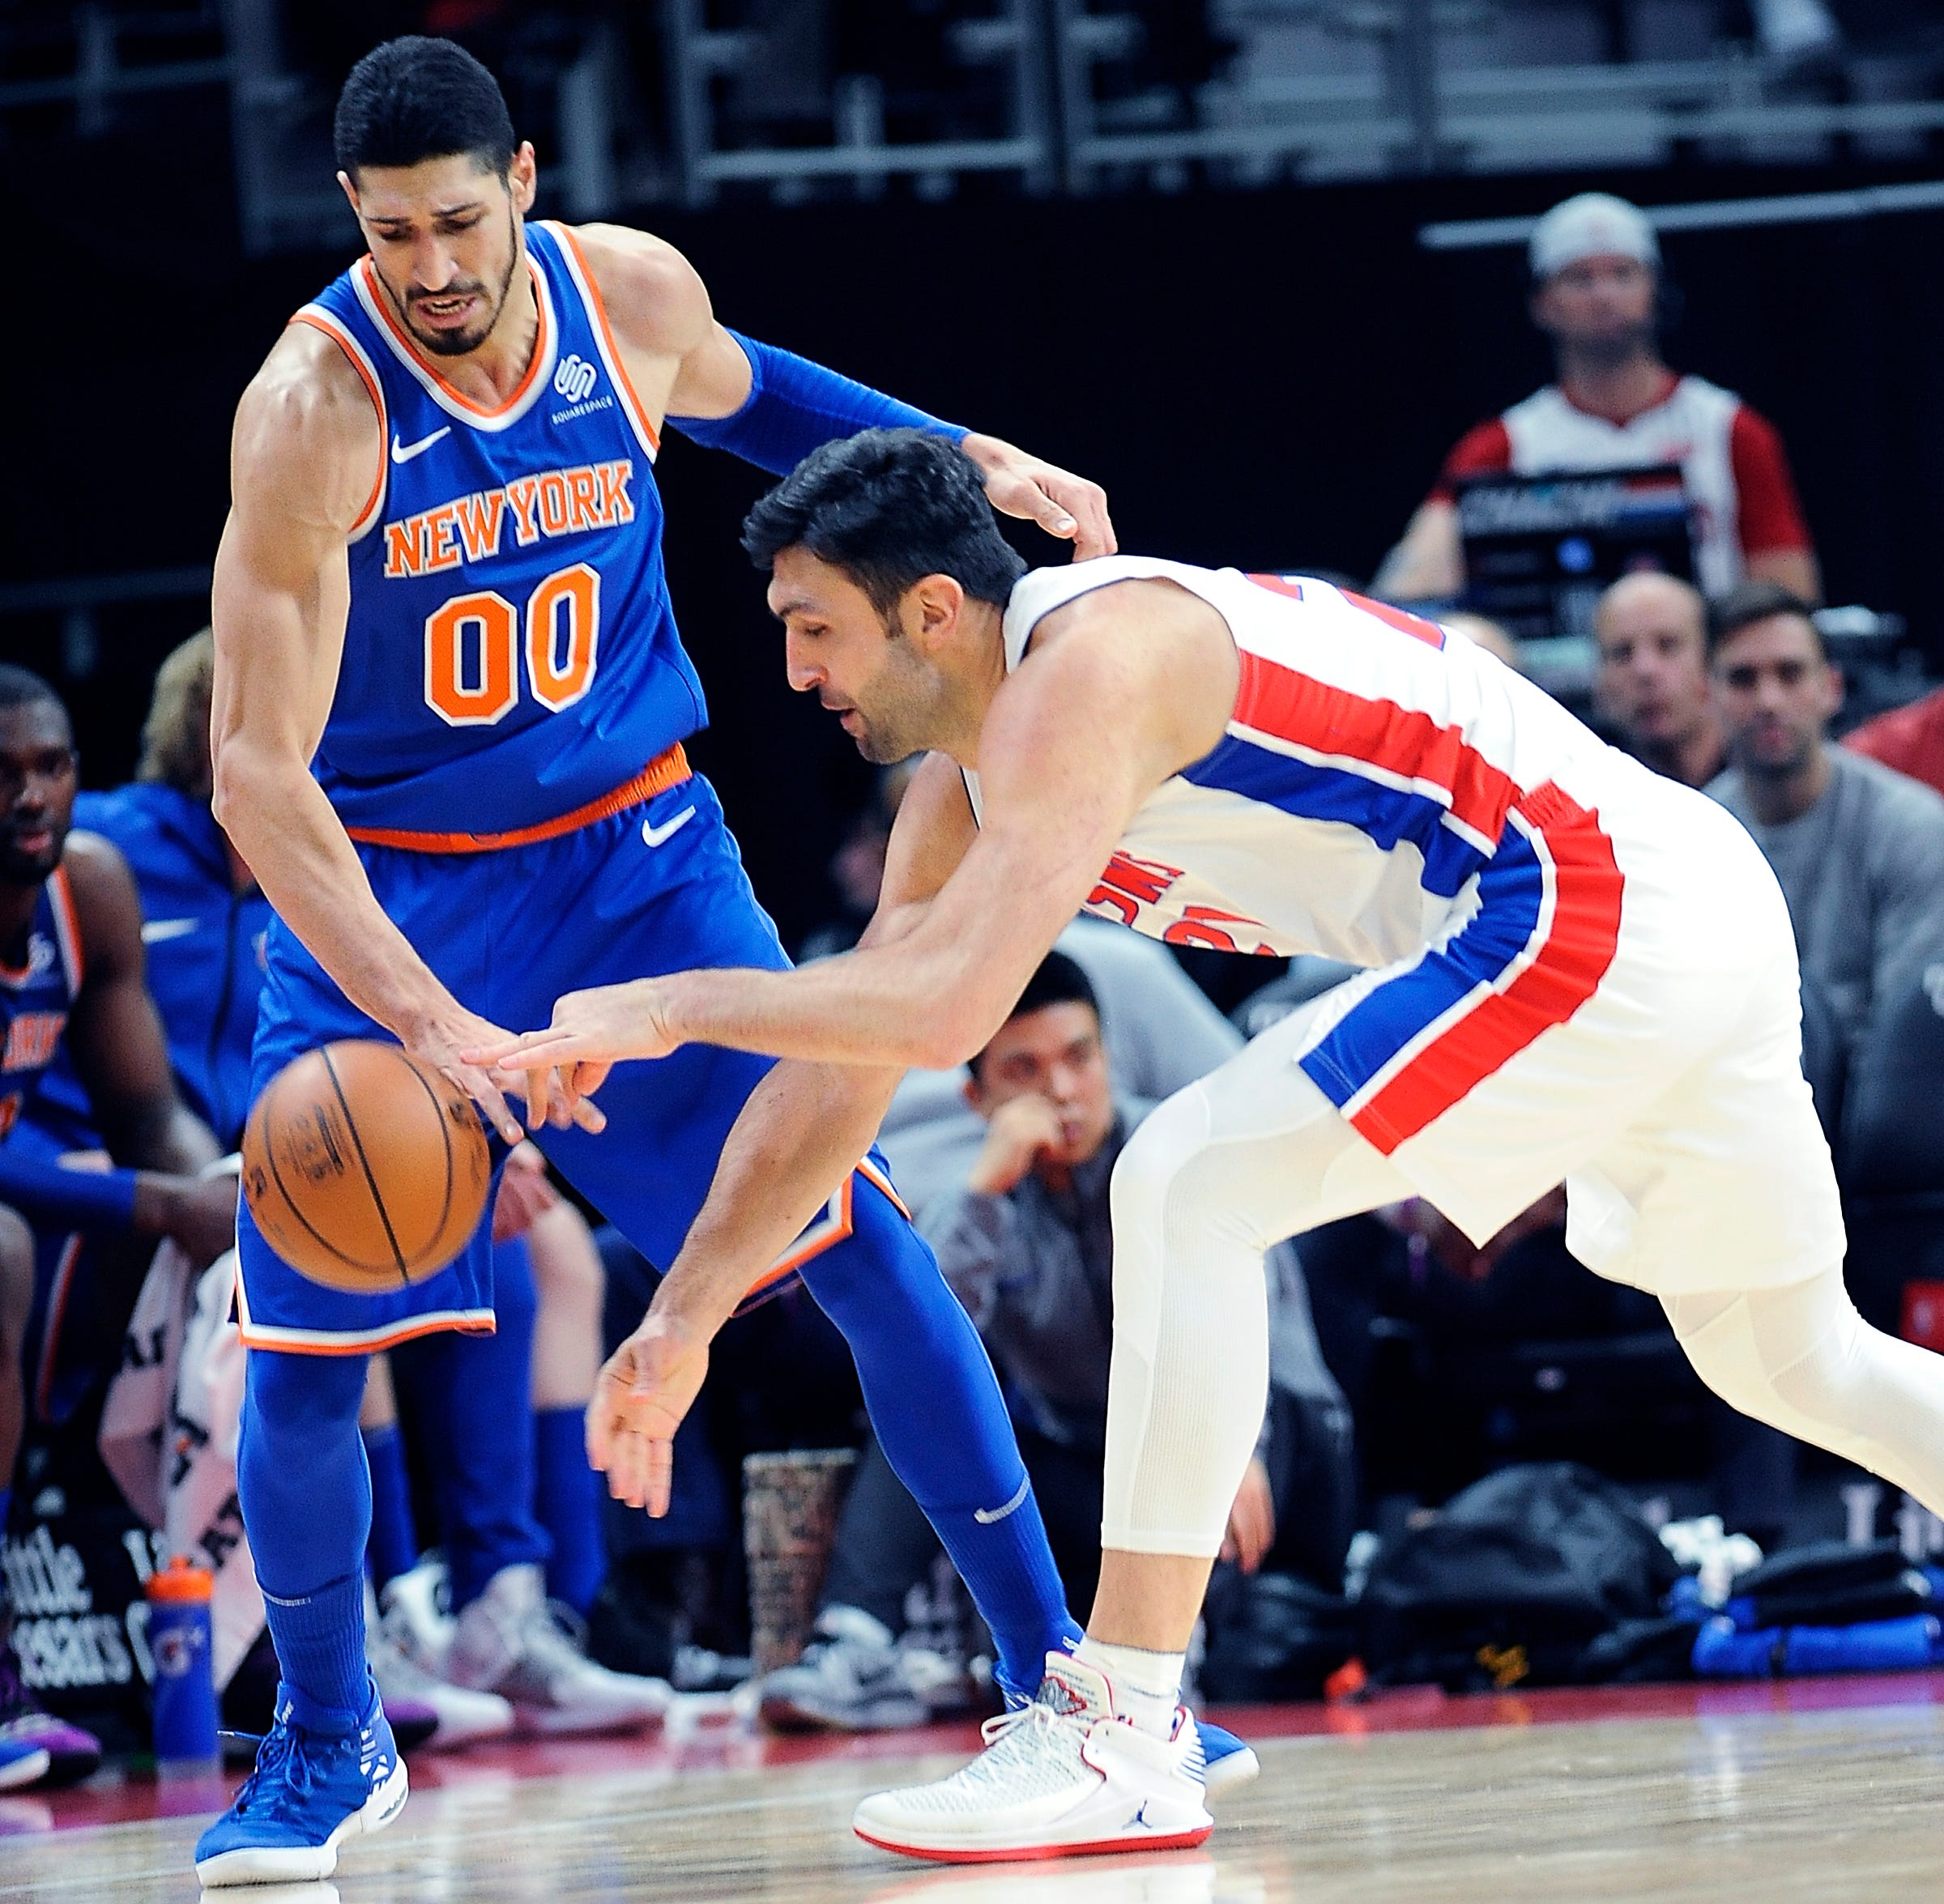 Pistons ' Zaza Pachulia and Knicks ' Enes Kanter battle for a loose ball in the first quarter.